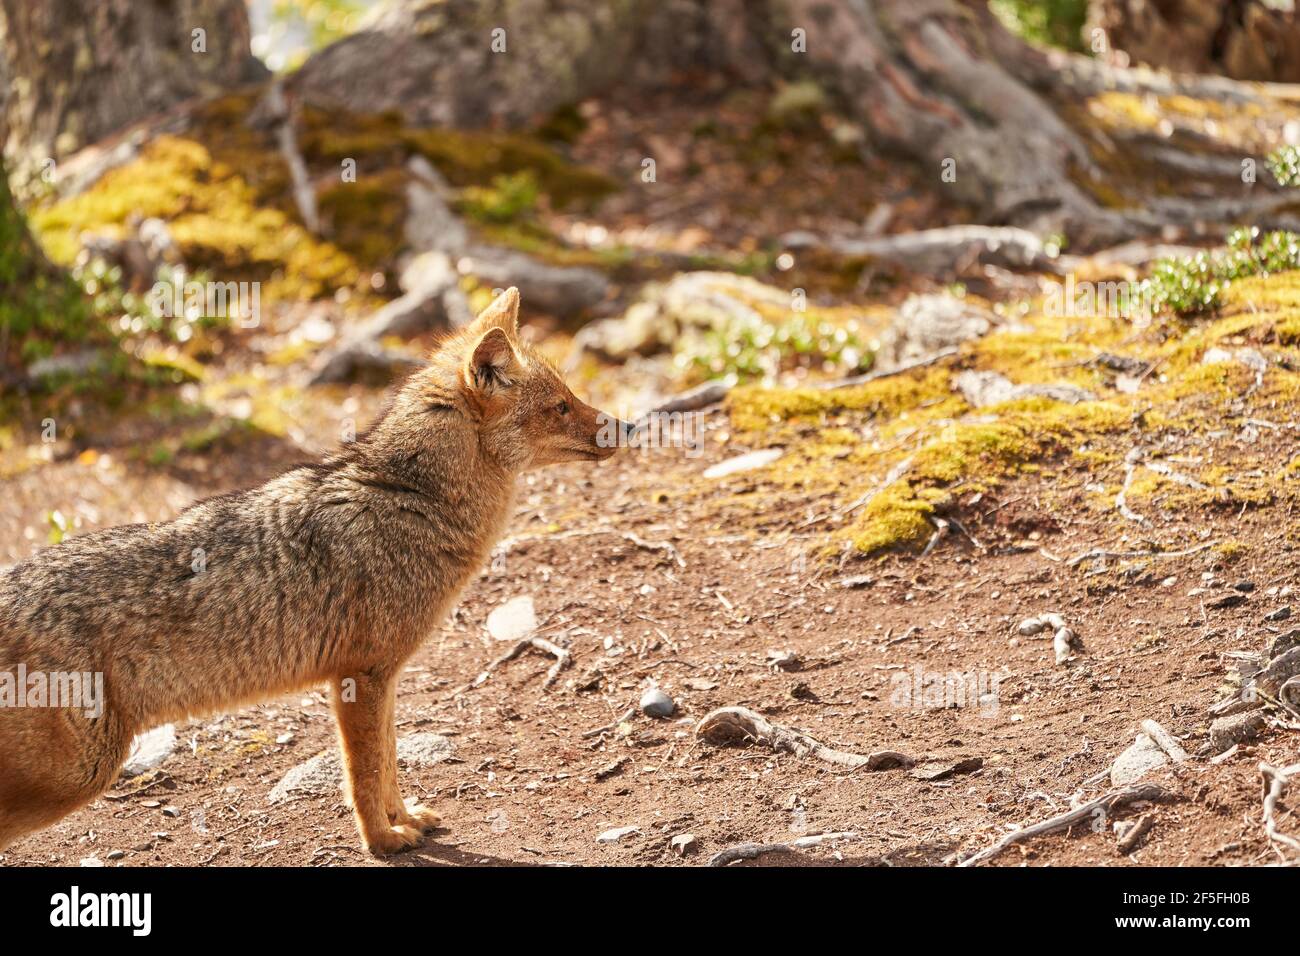 Lycalopex griseus, patagonian fox can be found on tierra del fuego, Patagonia, south america Stock Photo